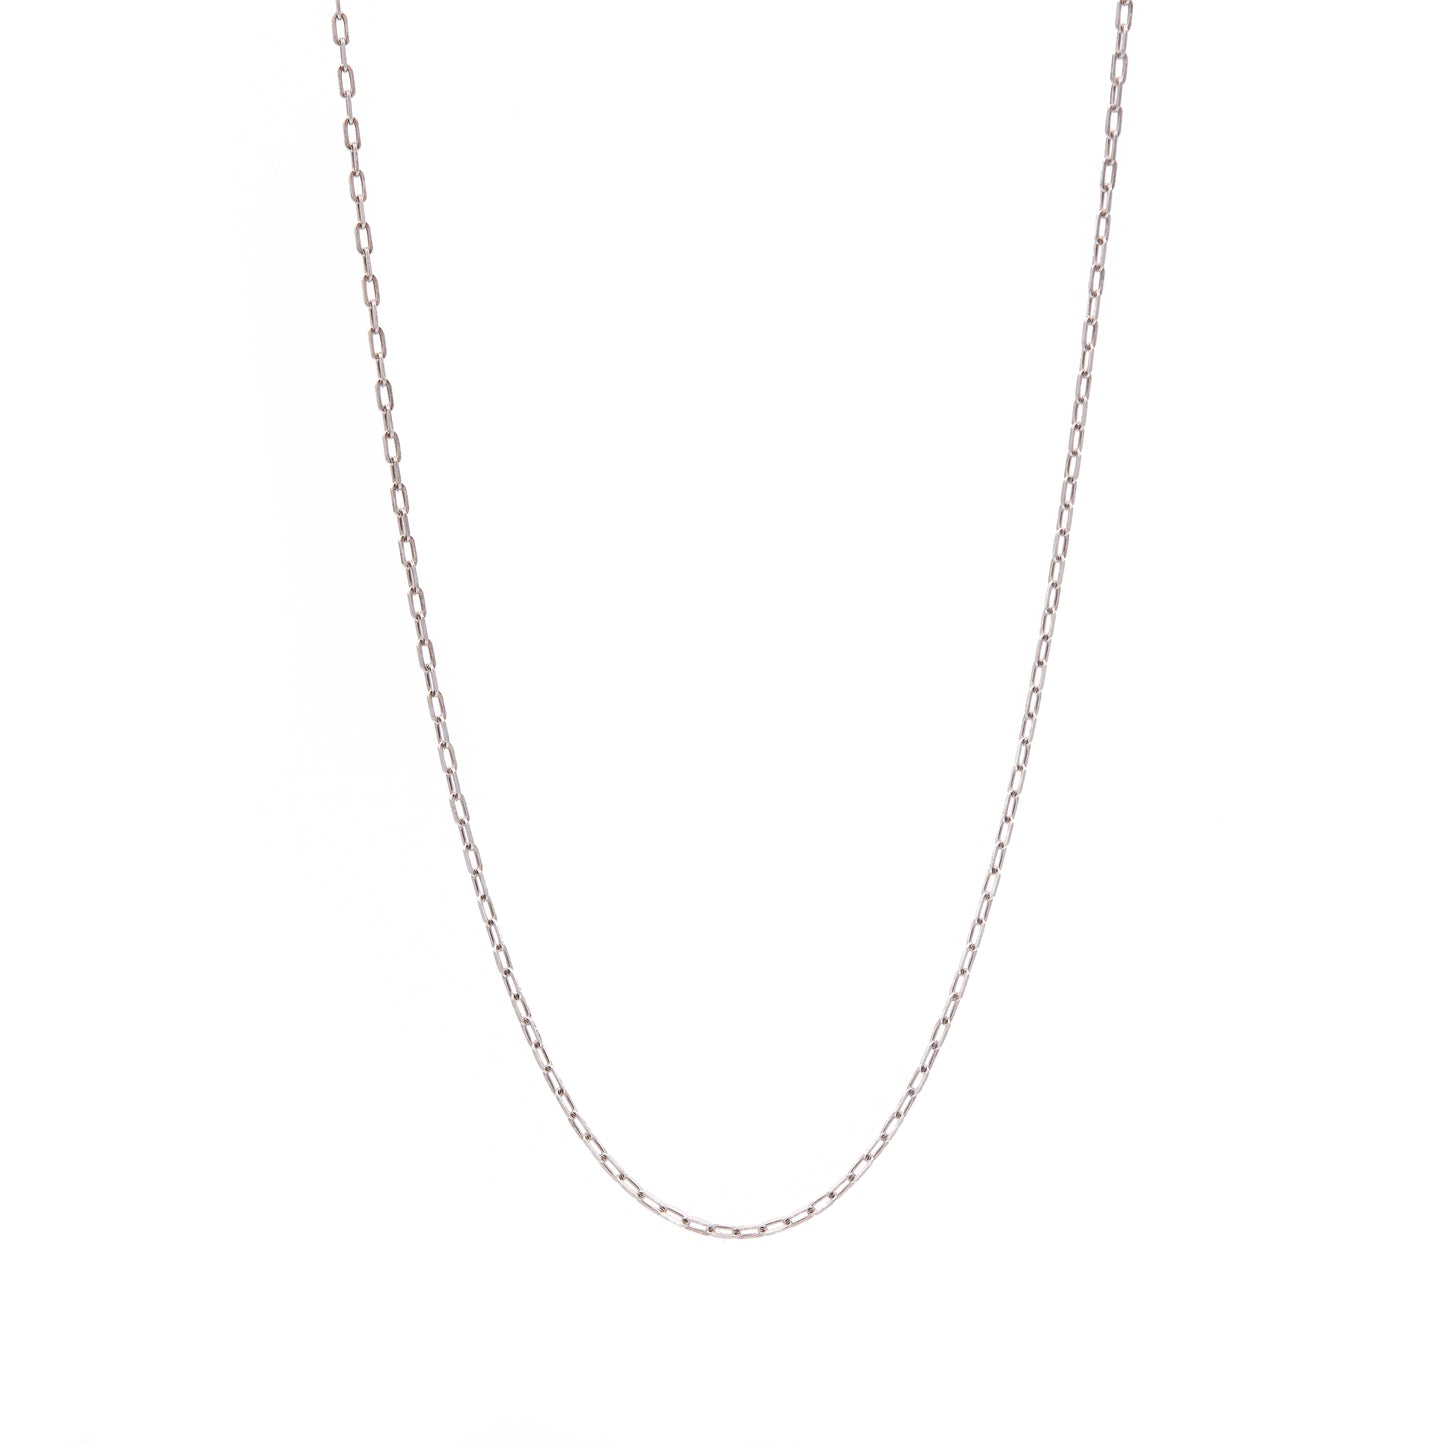 Drawn Cable Chain Choker Necklace